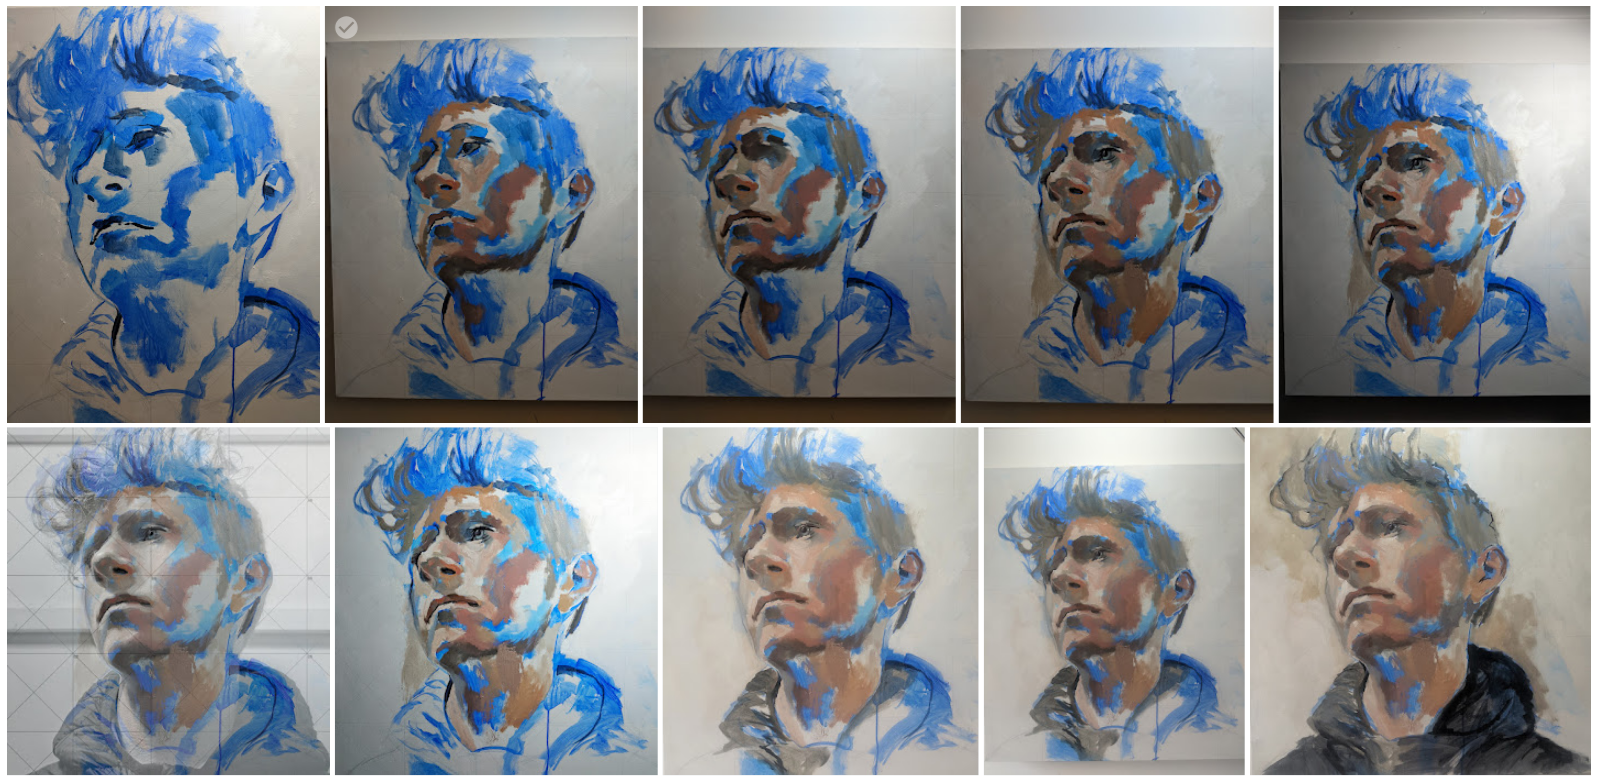 Stage 1, blue underpainting to basic form established, about an hour and a half to get to this stage.